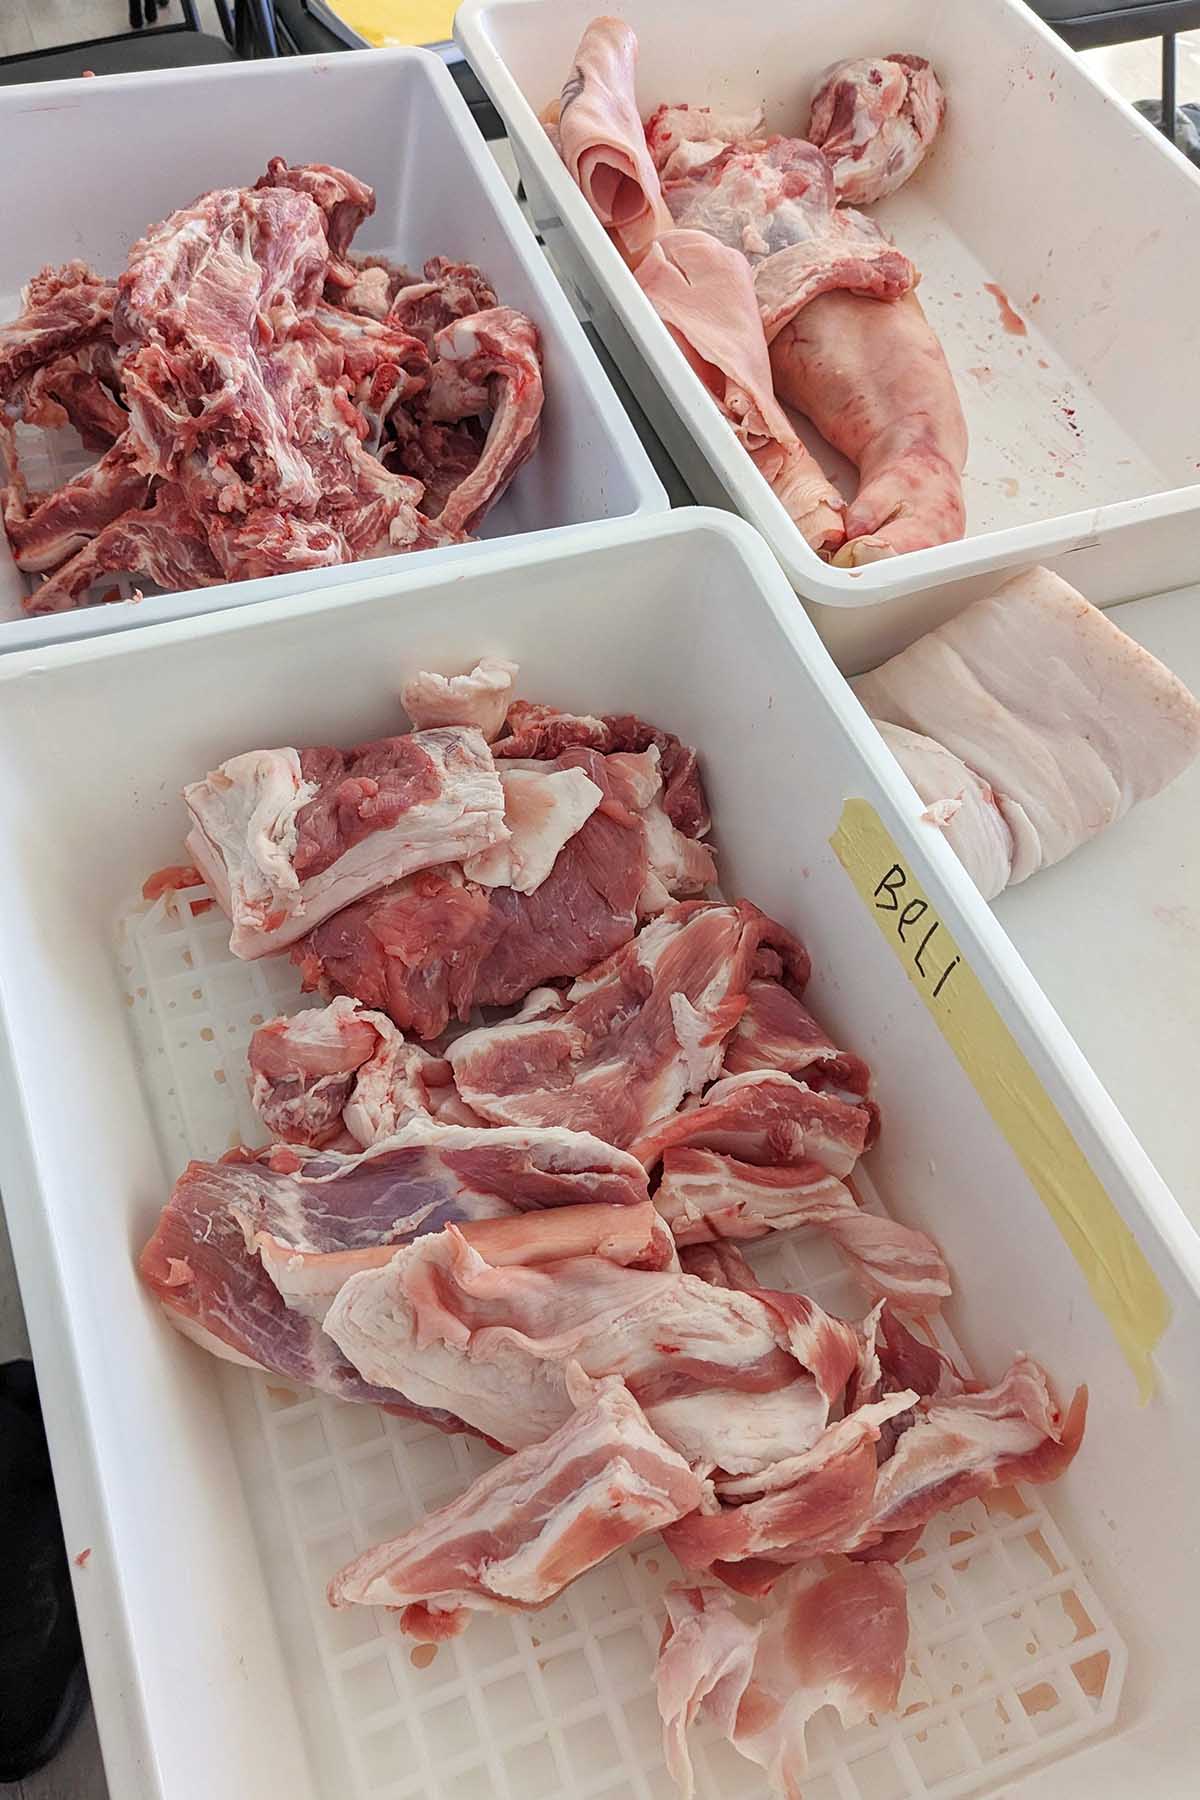 various cuts of pork separated in white boxes.